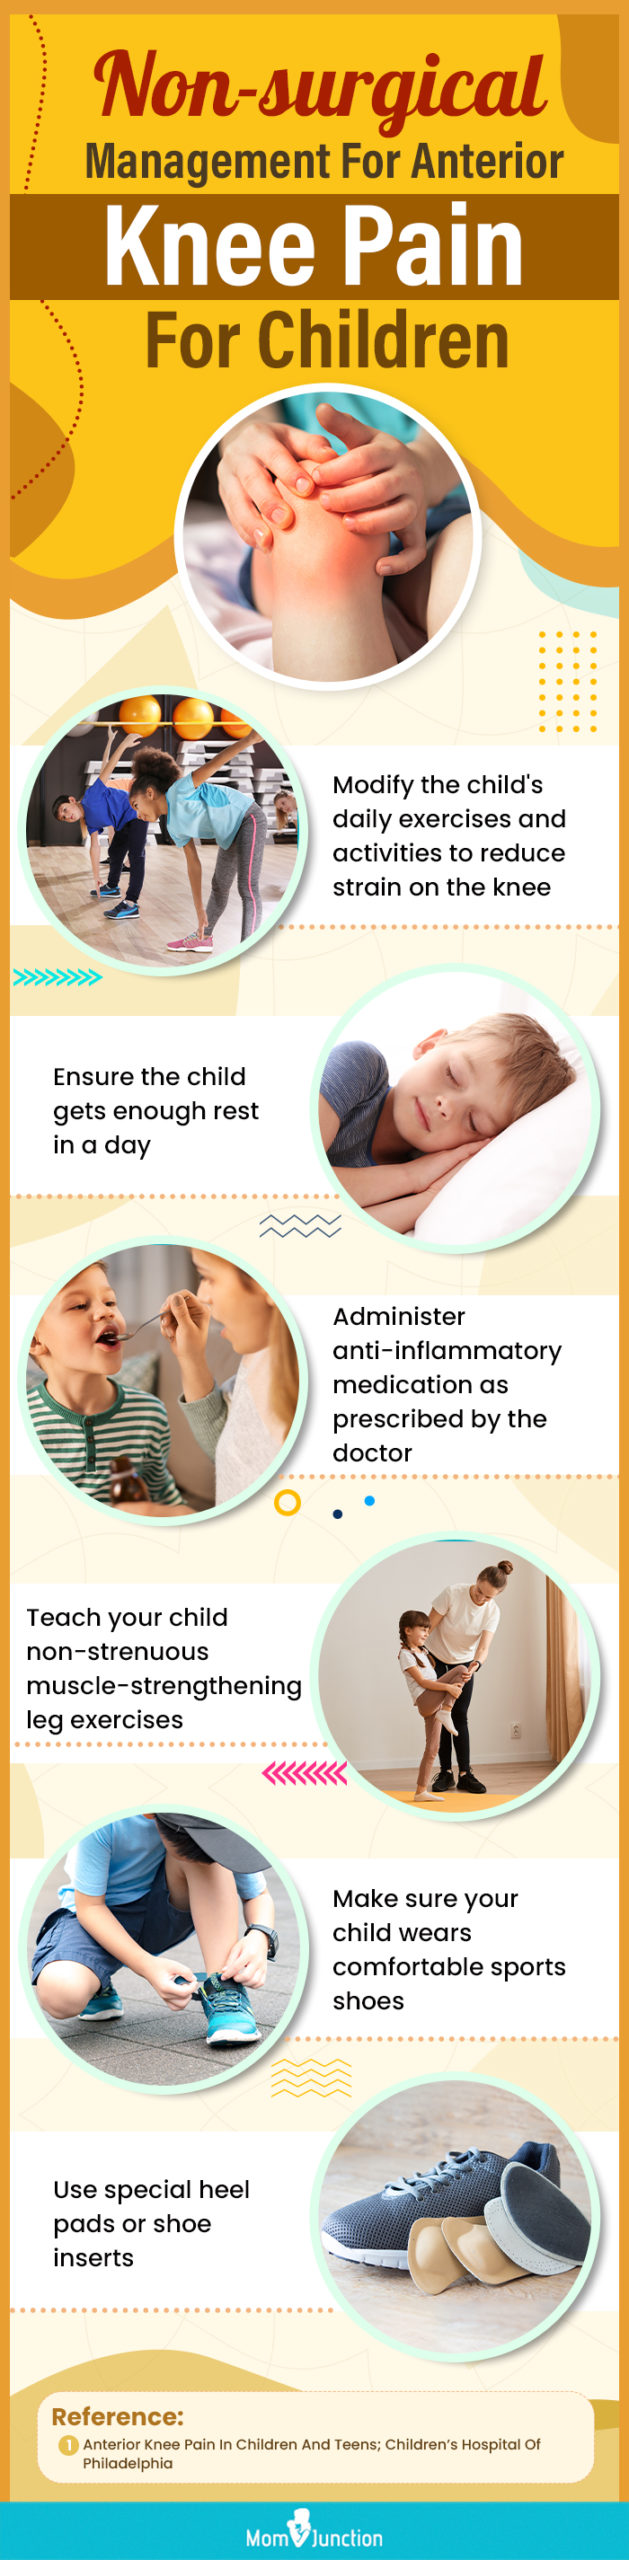 non surgical management for anterior knee pain in children (infographic)